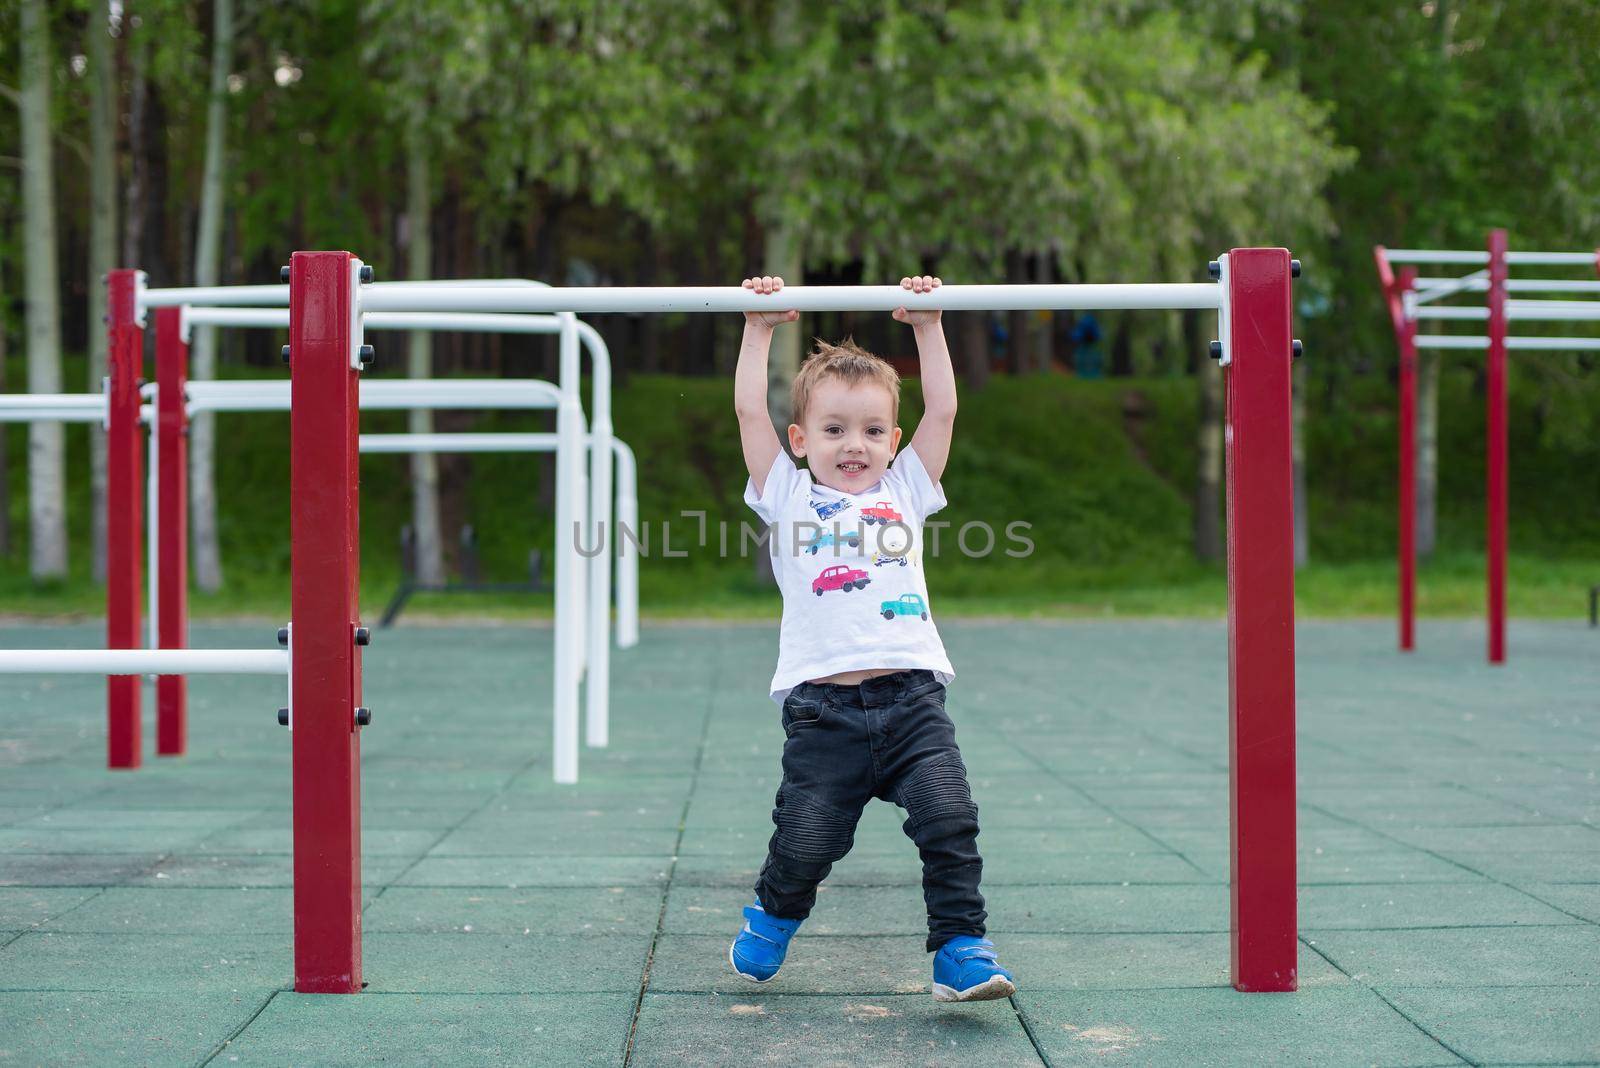 A little boy learns to pull up on a horizontal bar in the open air. The child is hanging on the uneven bars